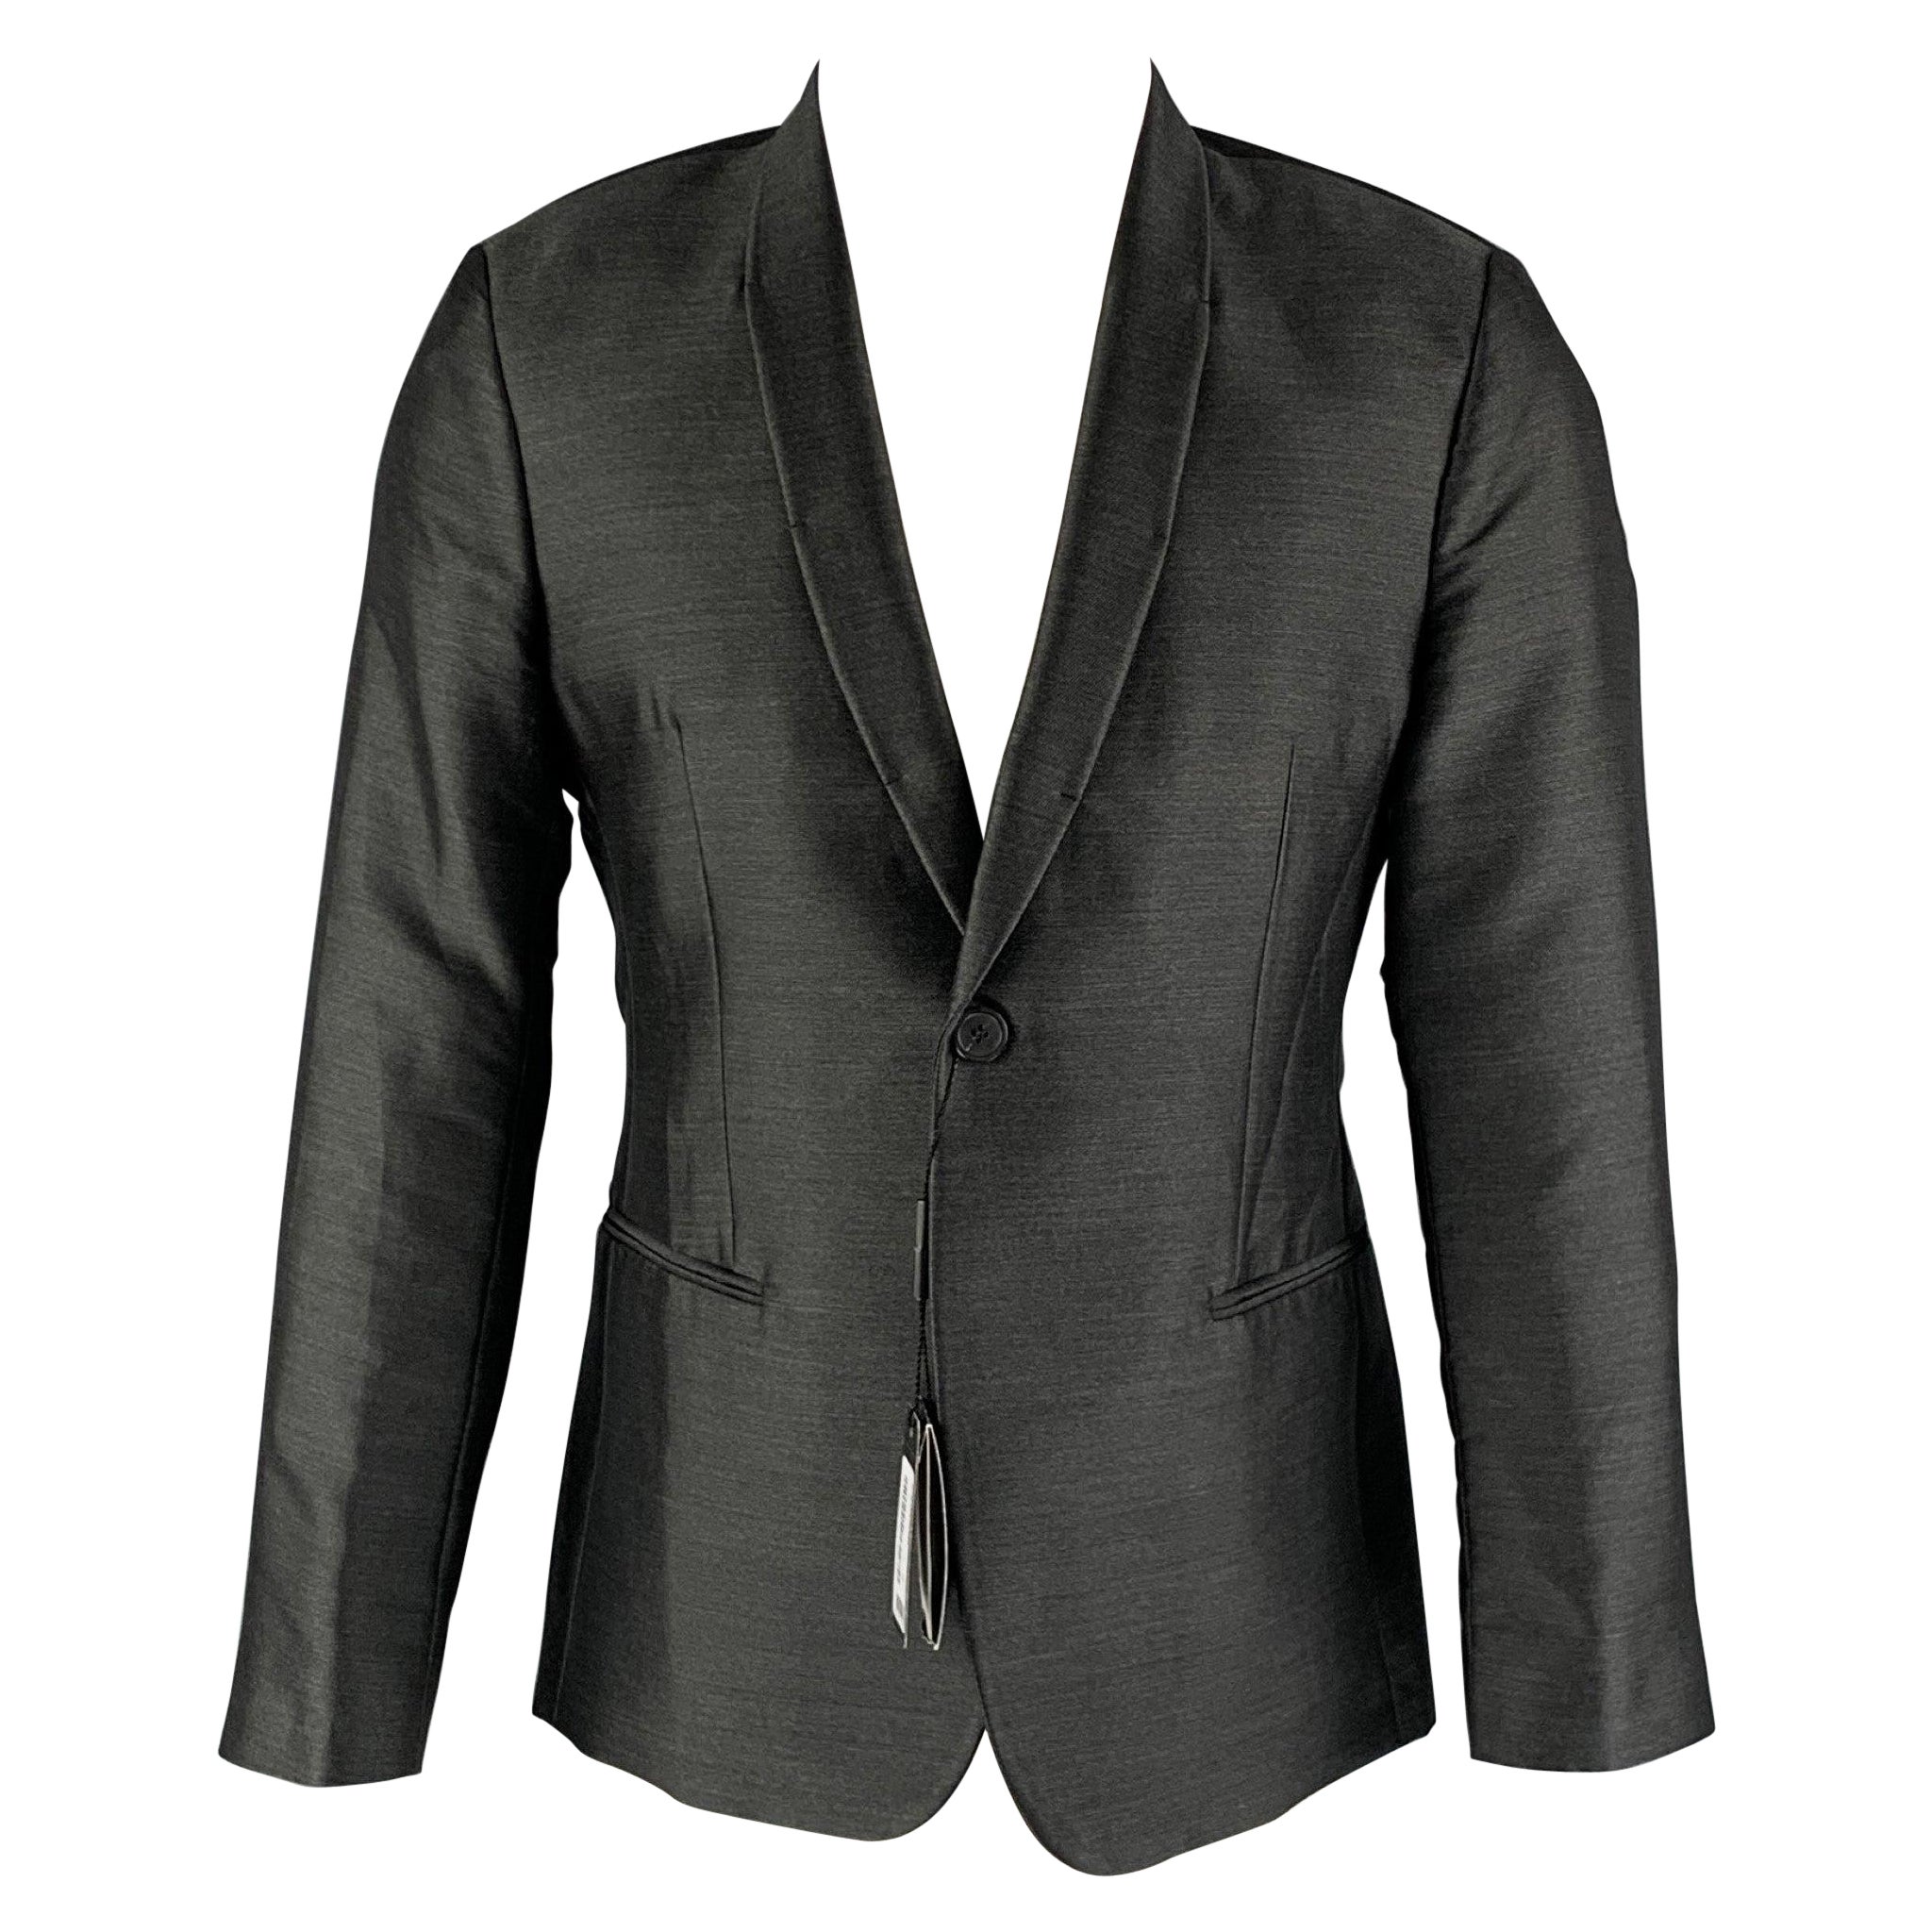 EMPORIO ARMANI Size 38 Charcoal Solid Polyester Blend Sport Coat For Sale